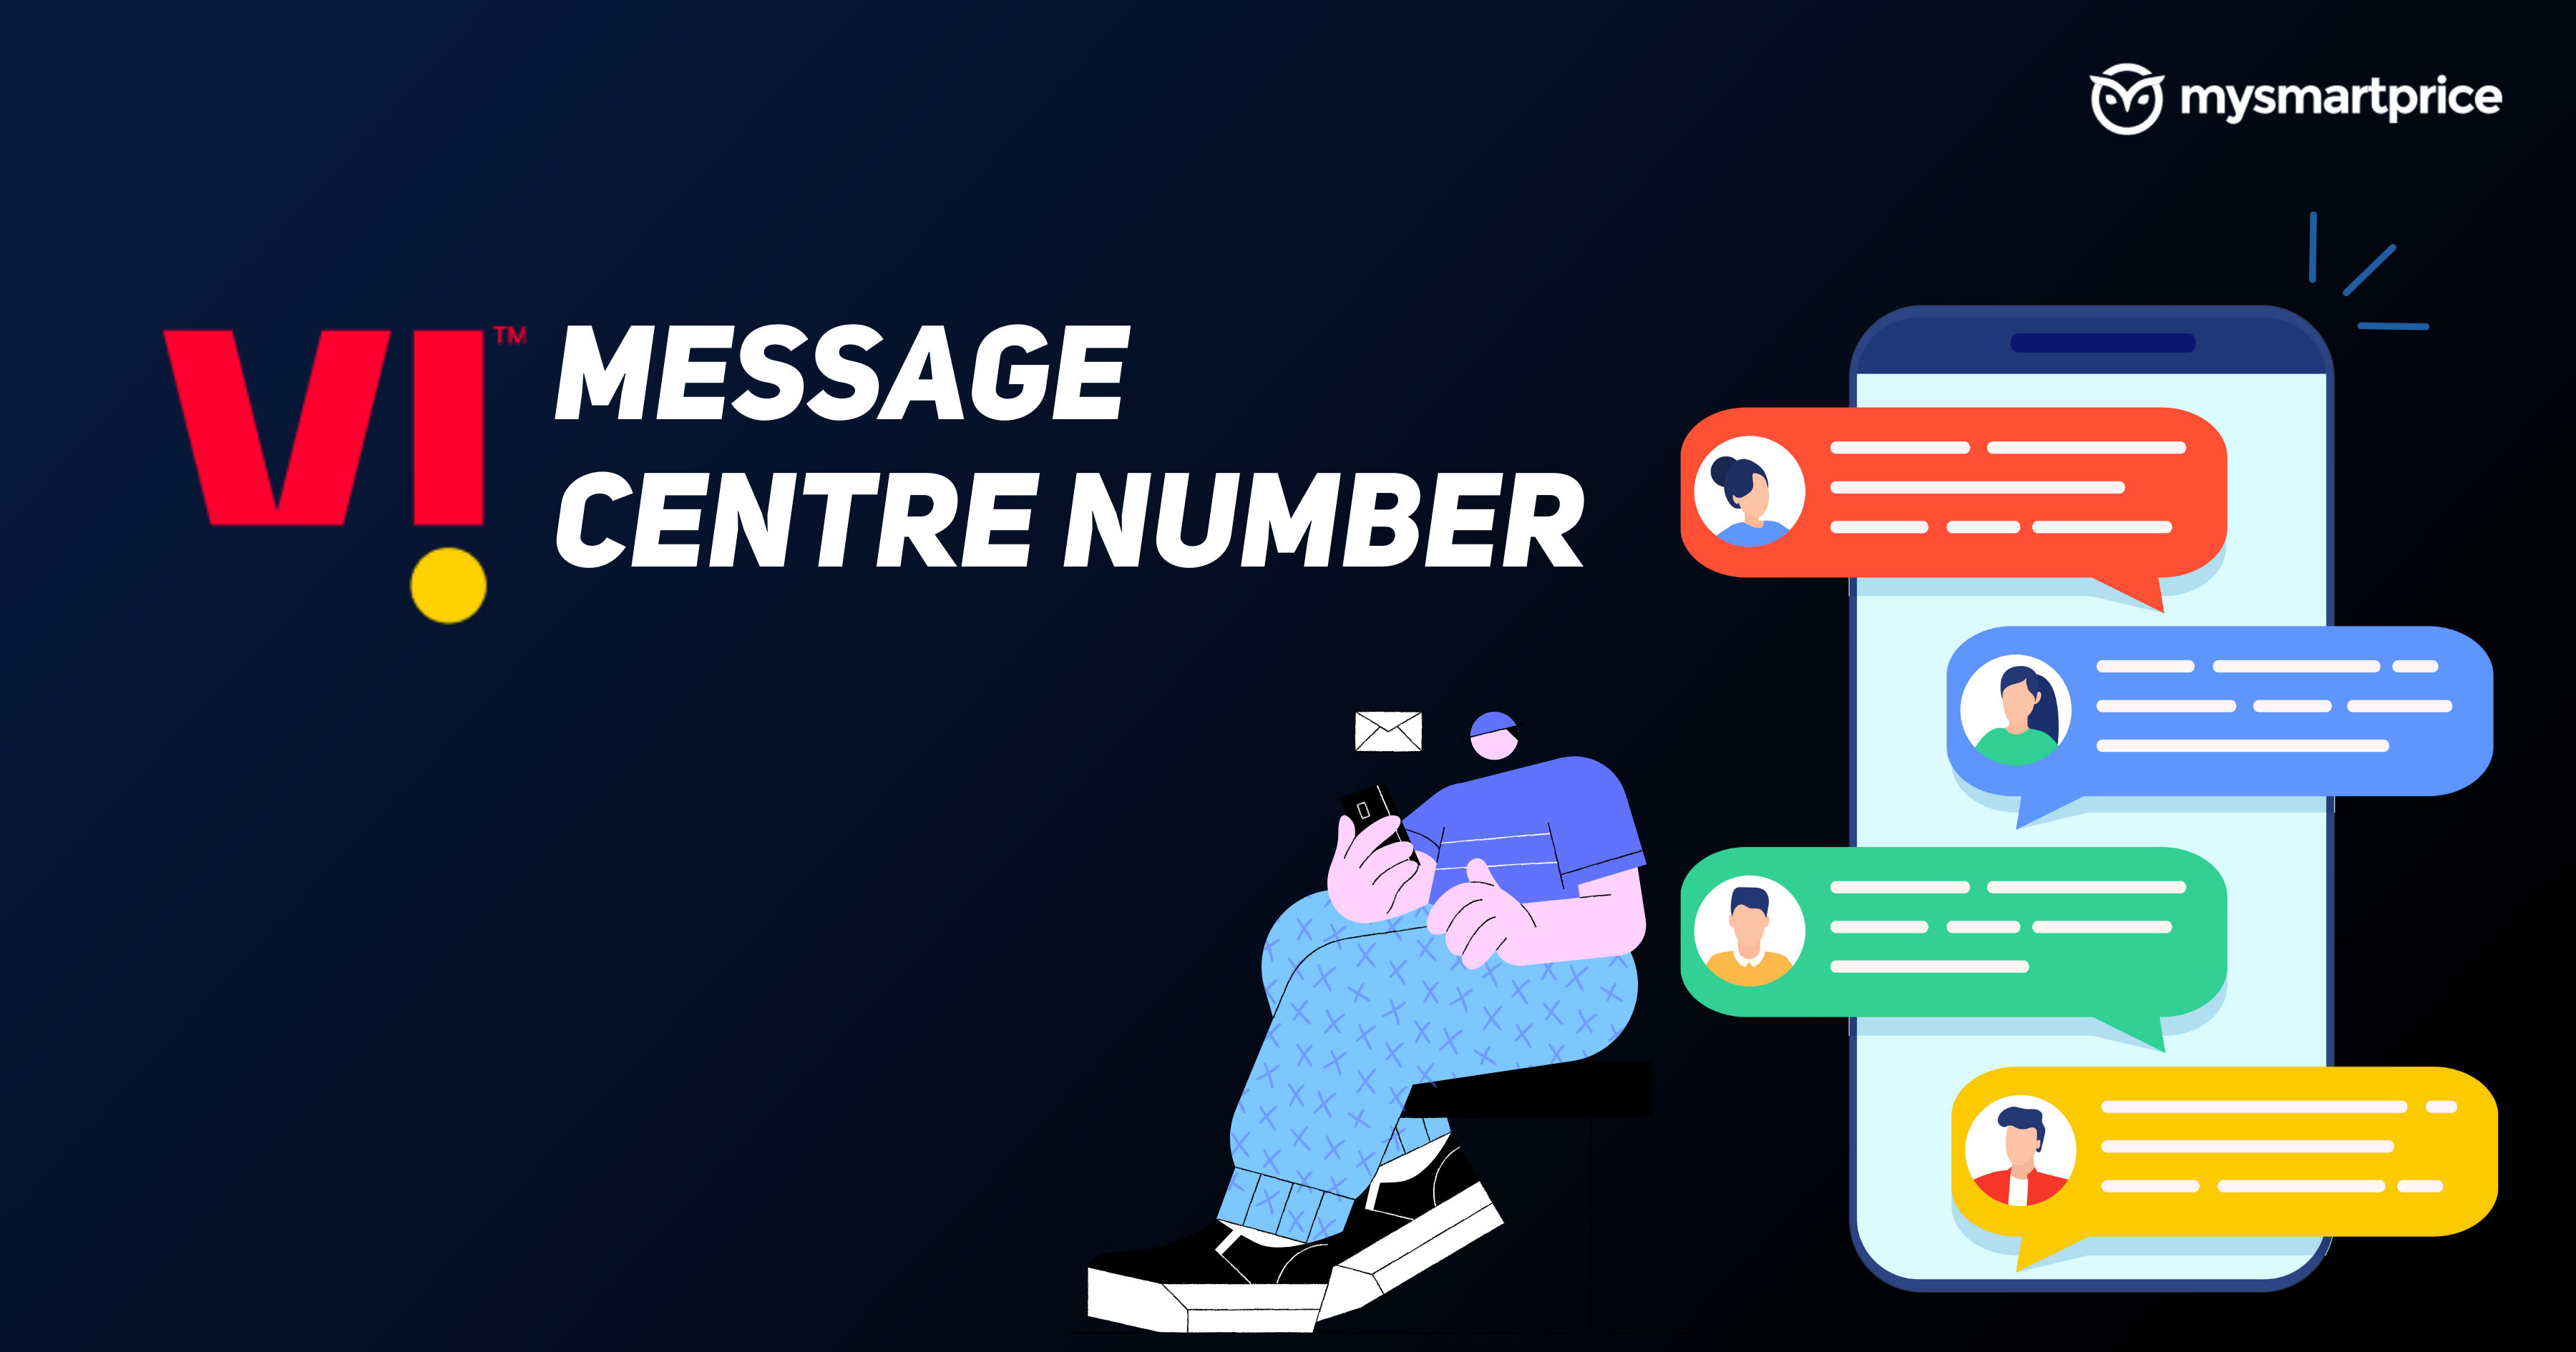 Vi Message Centre Number: List Of All Vodafone Idea SMS Center Numbers State-wise , How to Change, and More